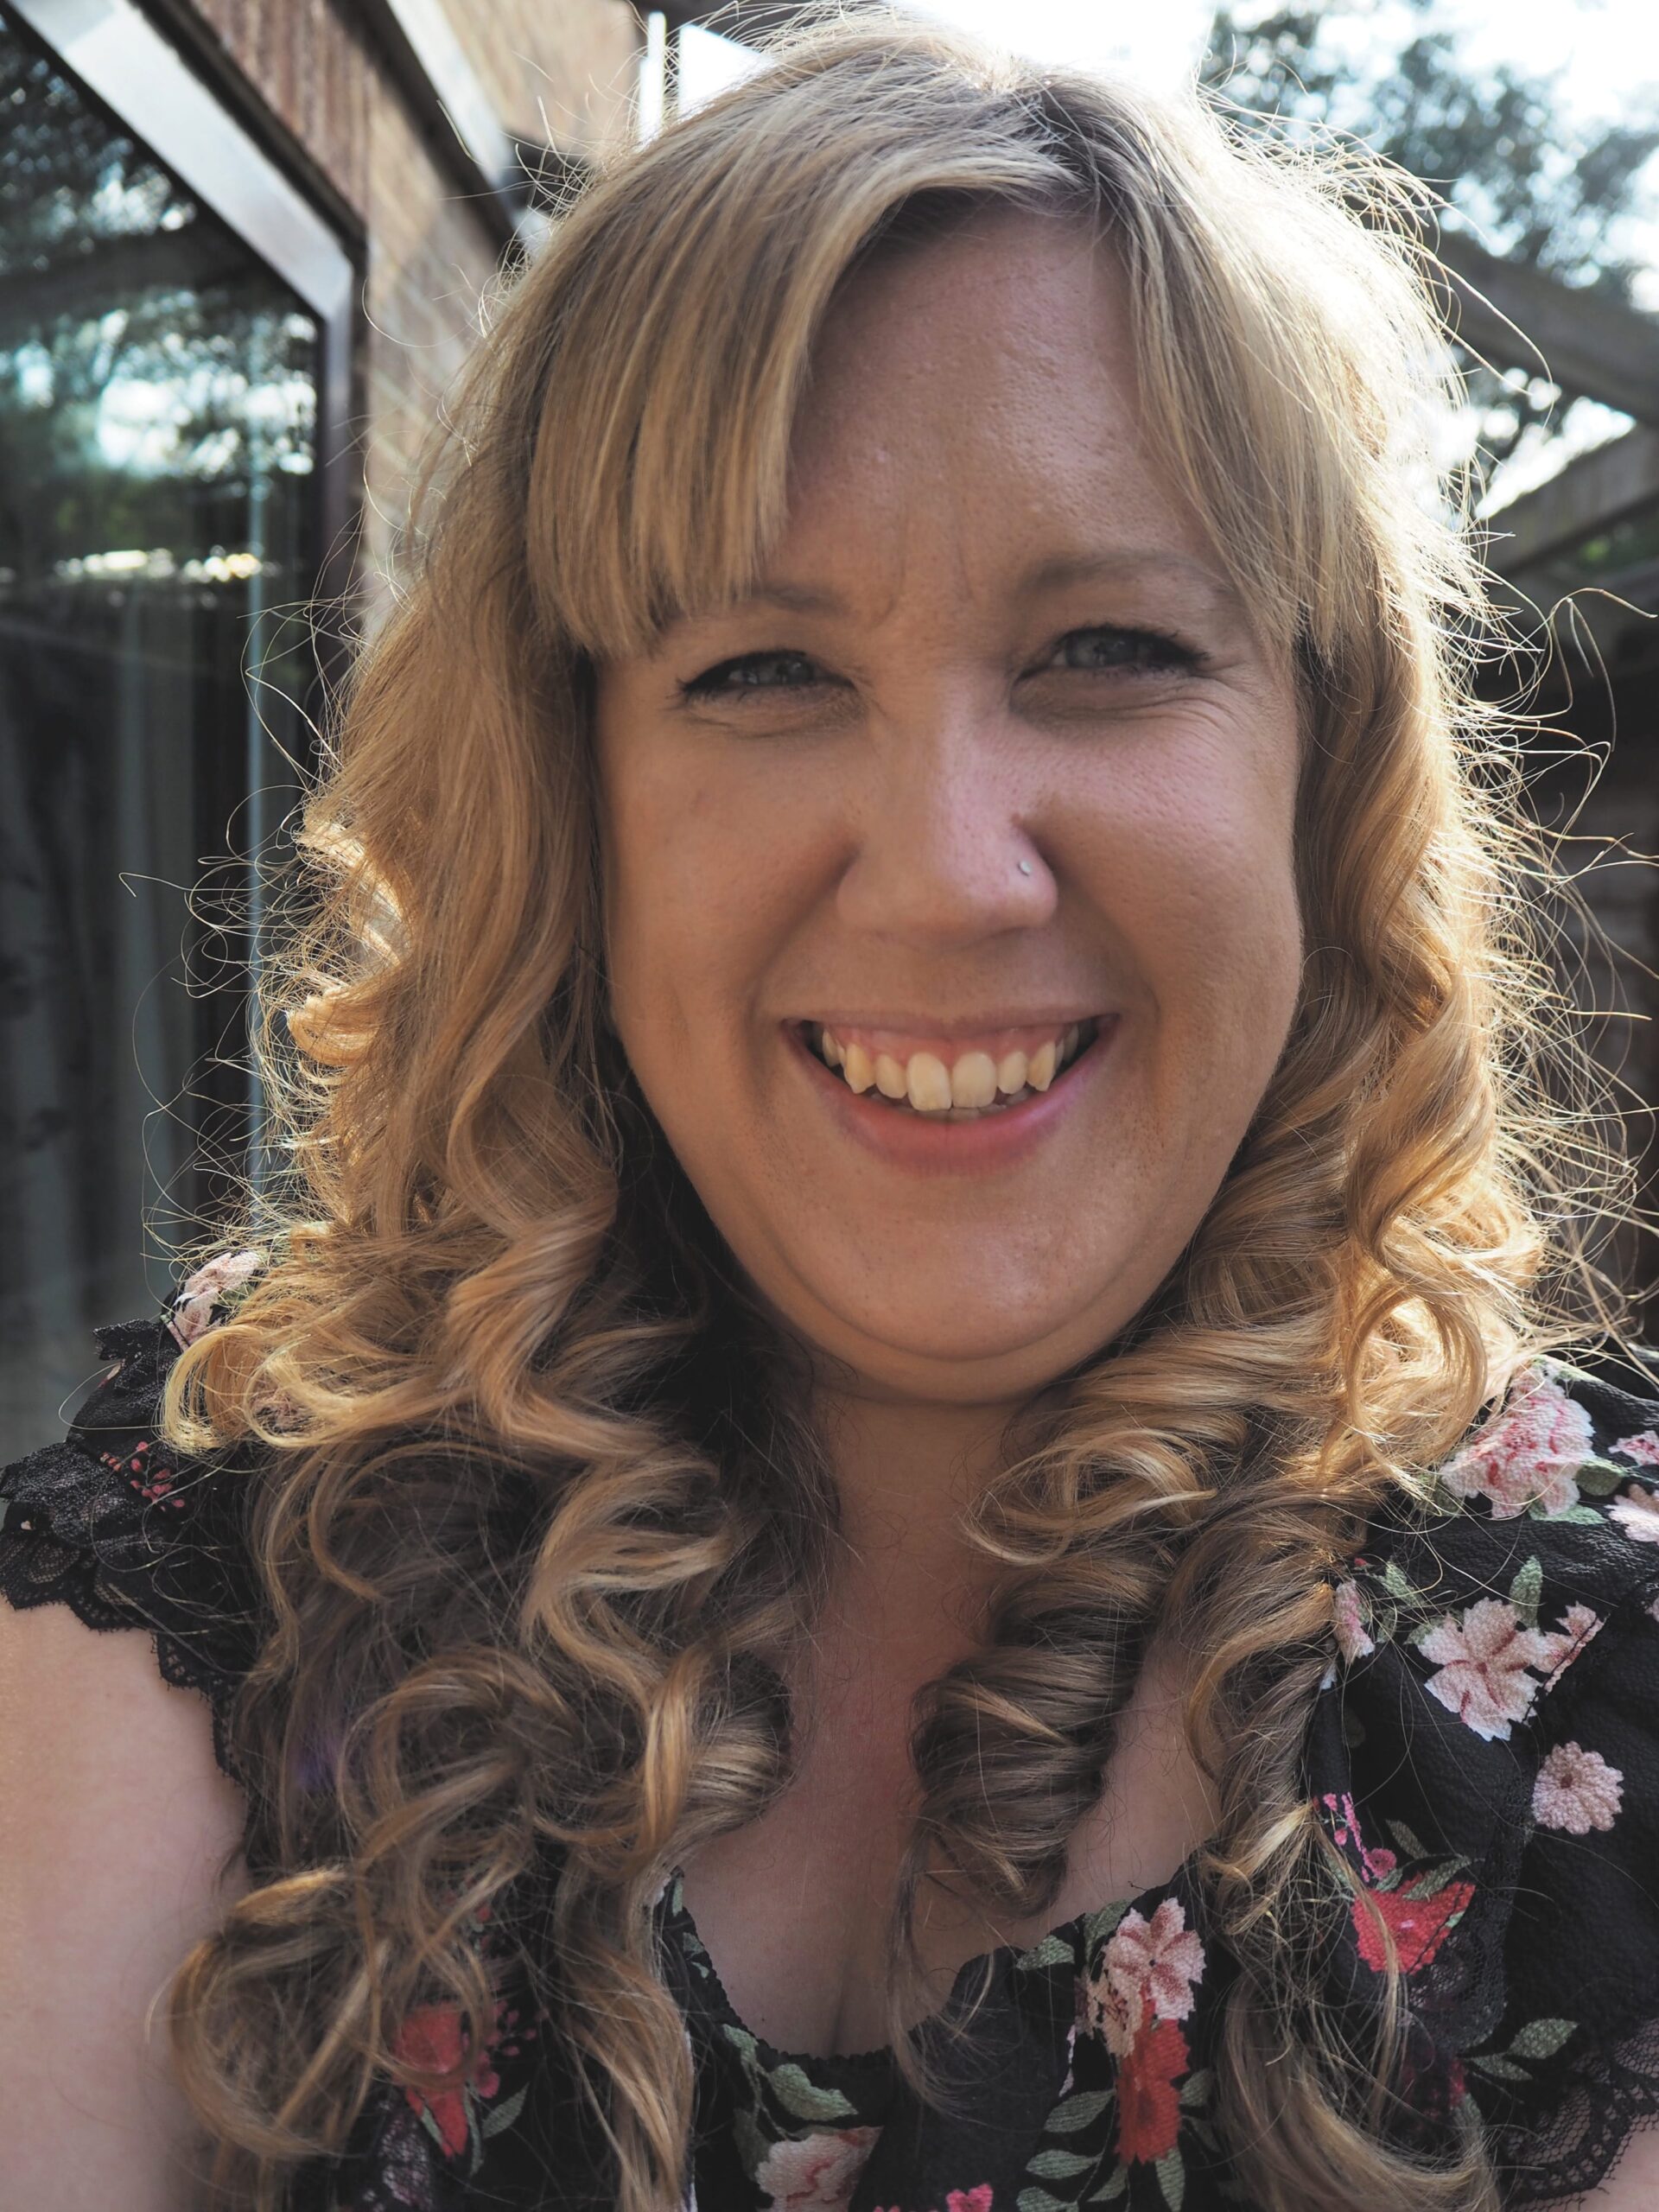 I'm A Finalist in the BritMums Brilliance in Blogging Awards - picture of me